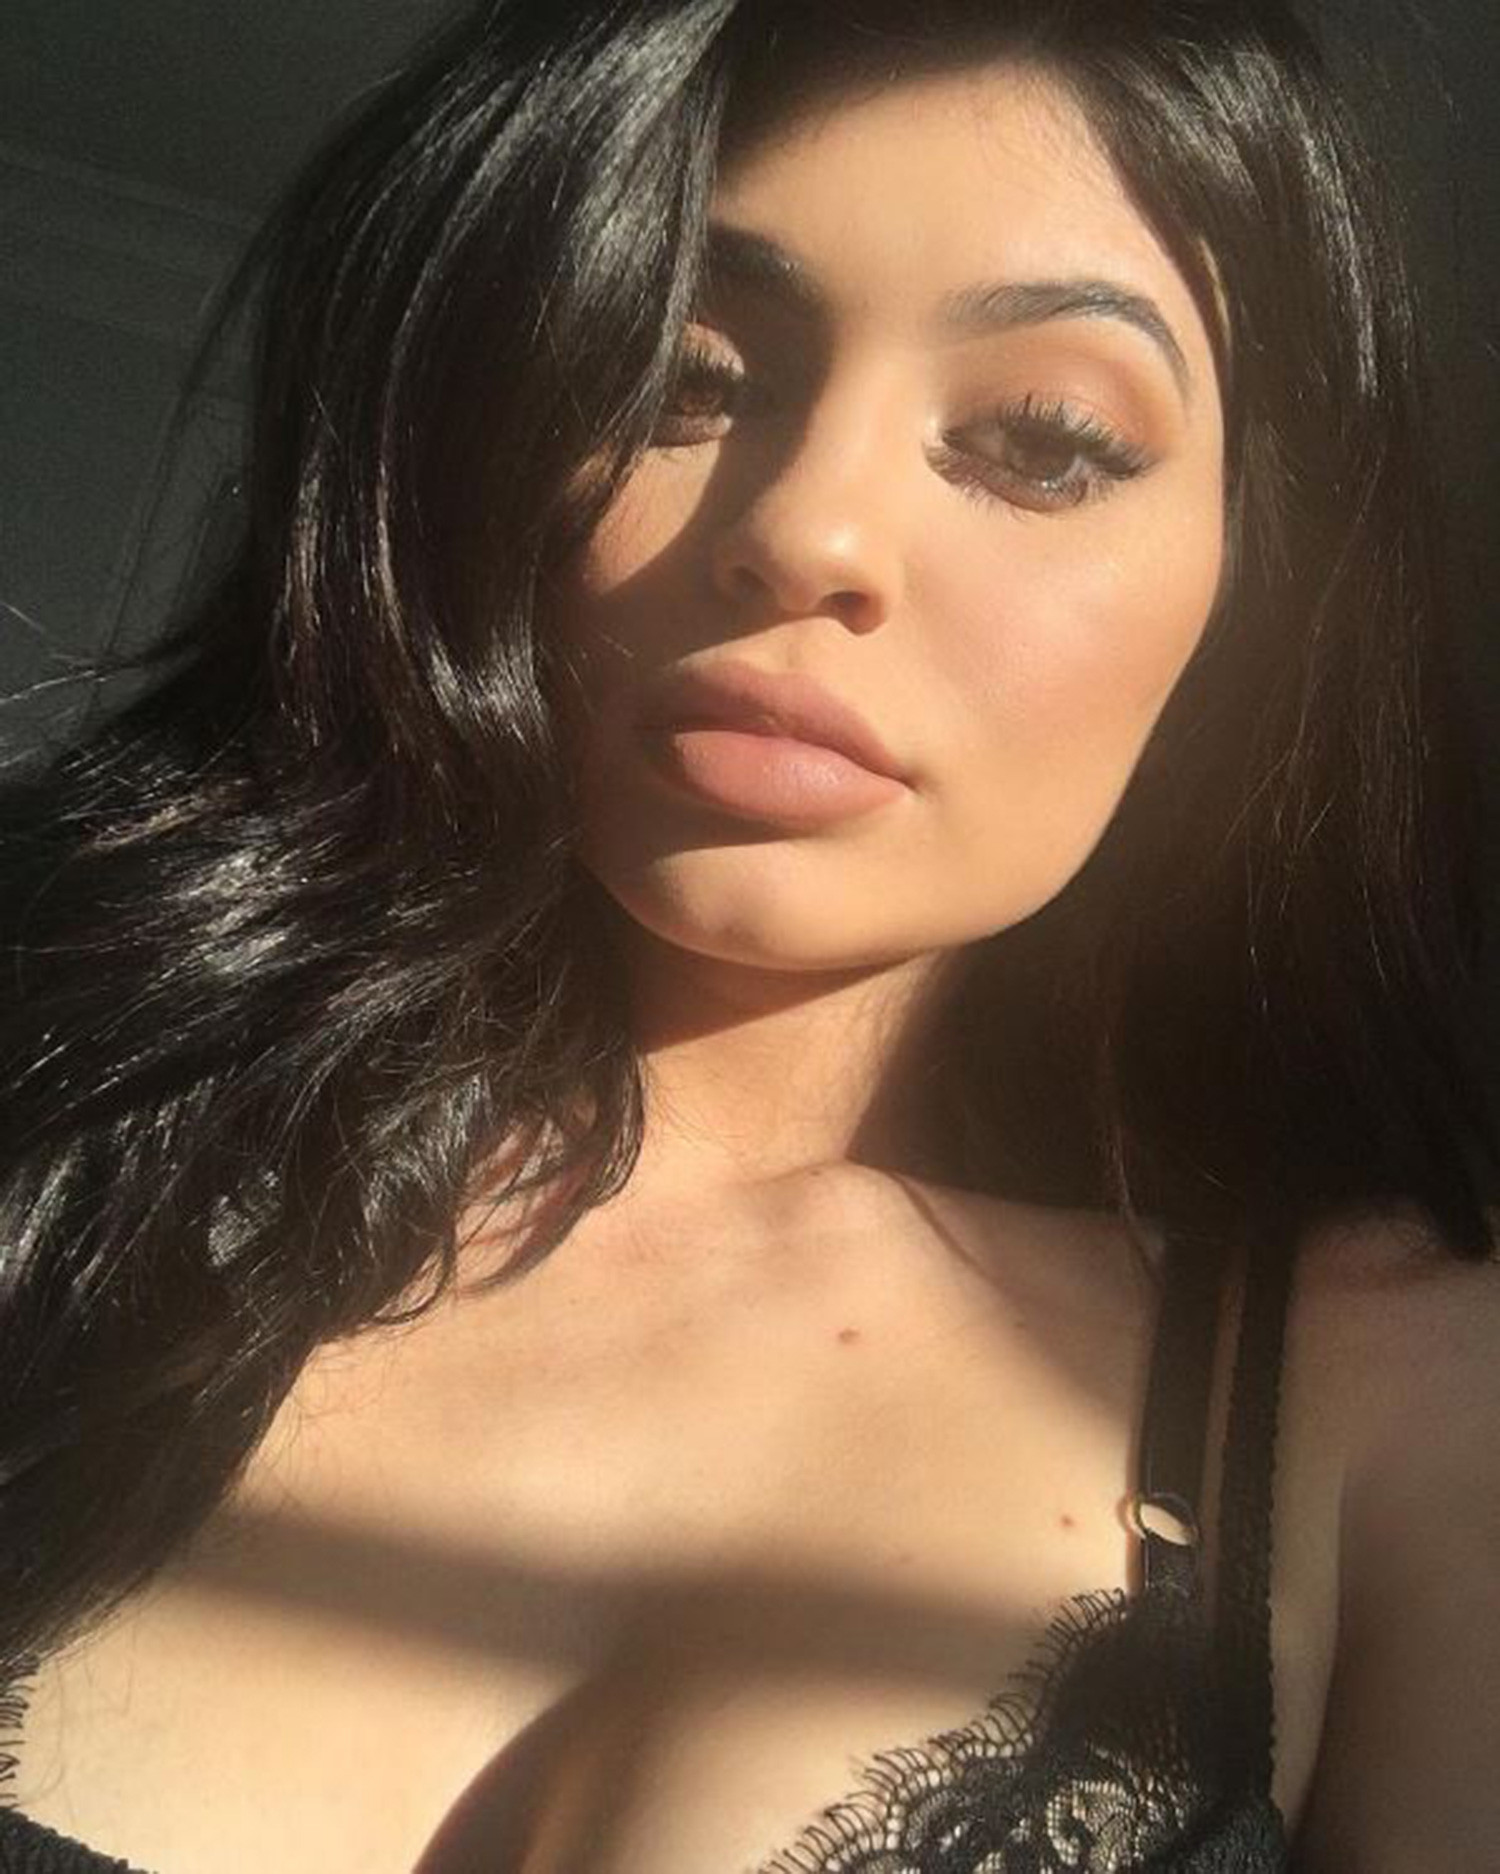 You'll never see my sex tape! Kylie Jenner shoots herself in ...